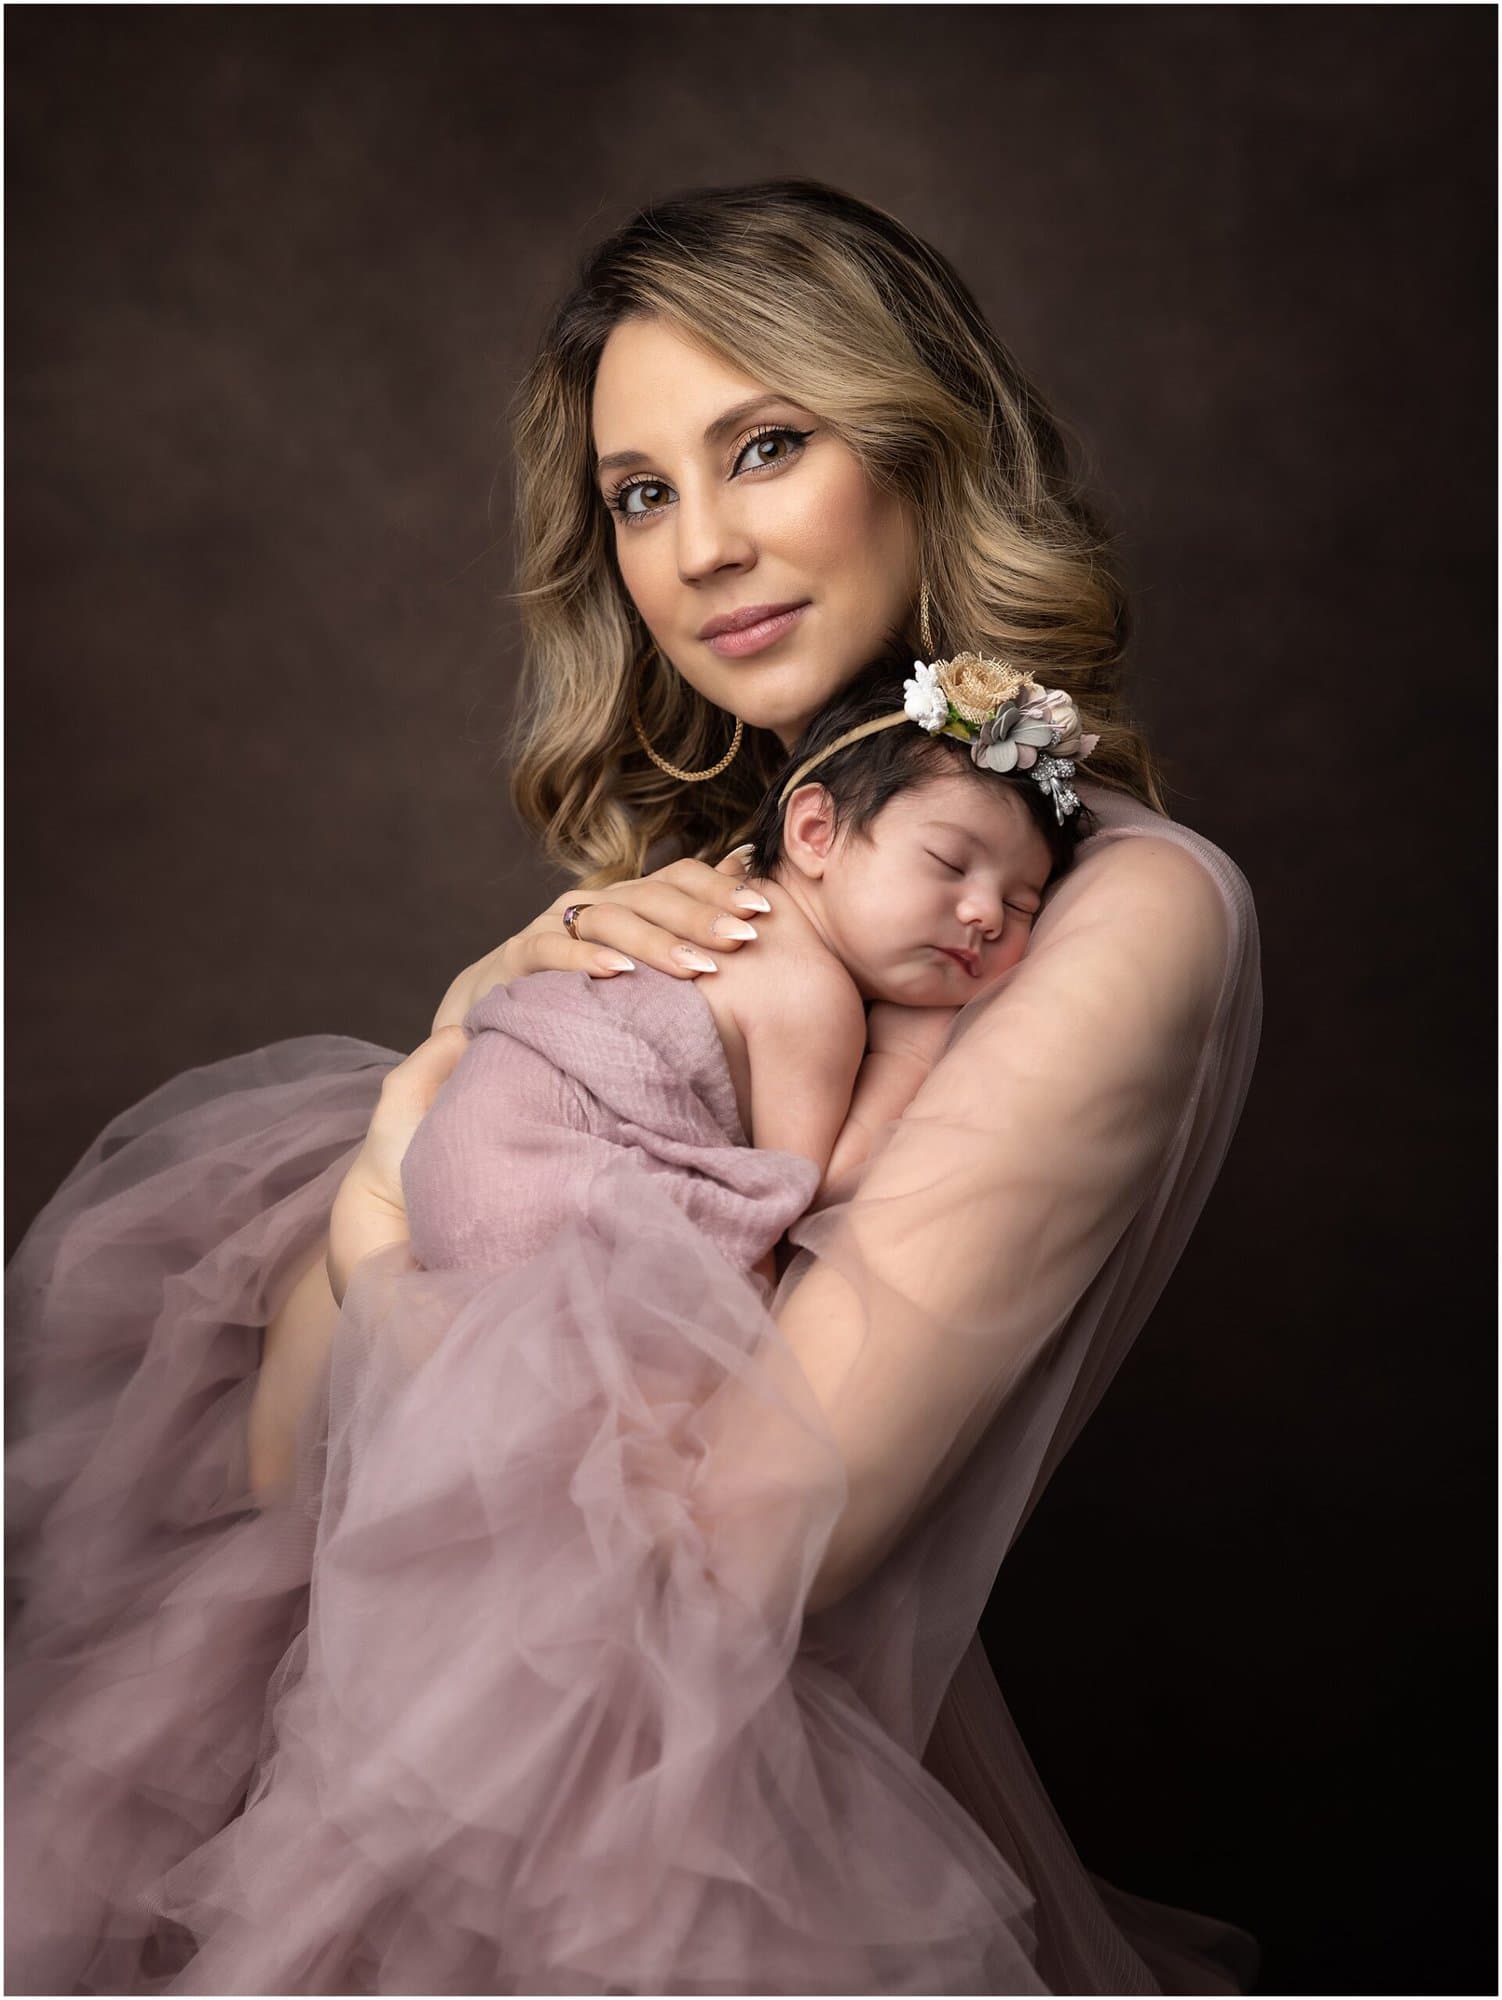 Beautiful Mother holds her Newborn Baby girl while wearing a pink tulle dress during a Newborn Photoshoot with Suffolk Photographer Alison McKenny